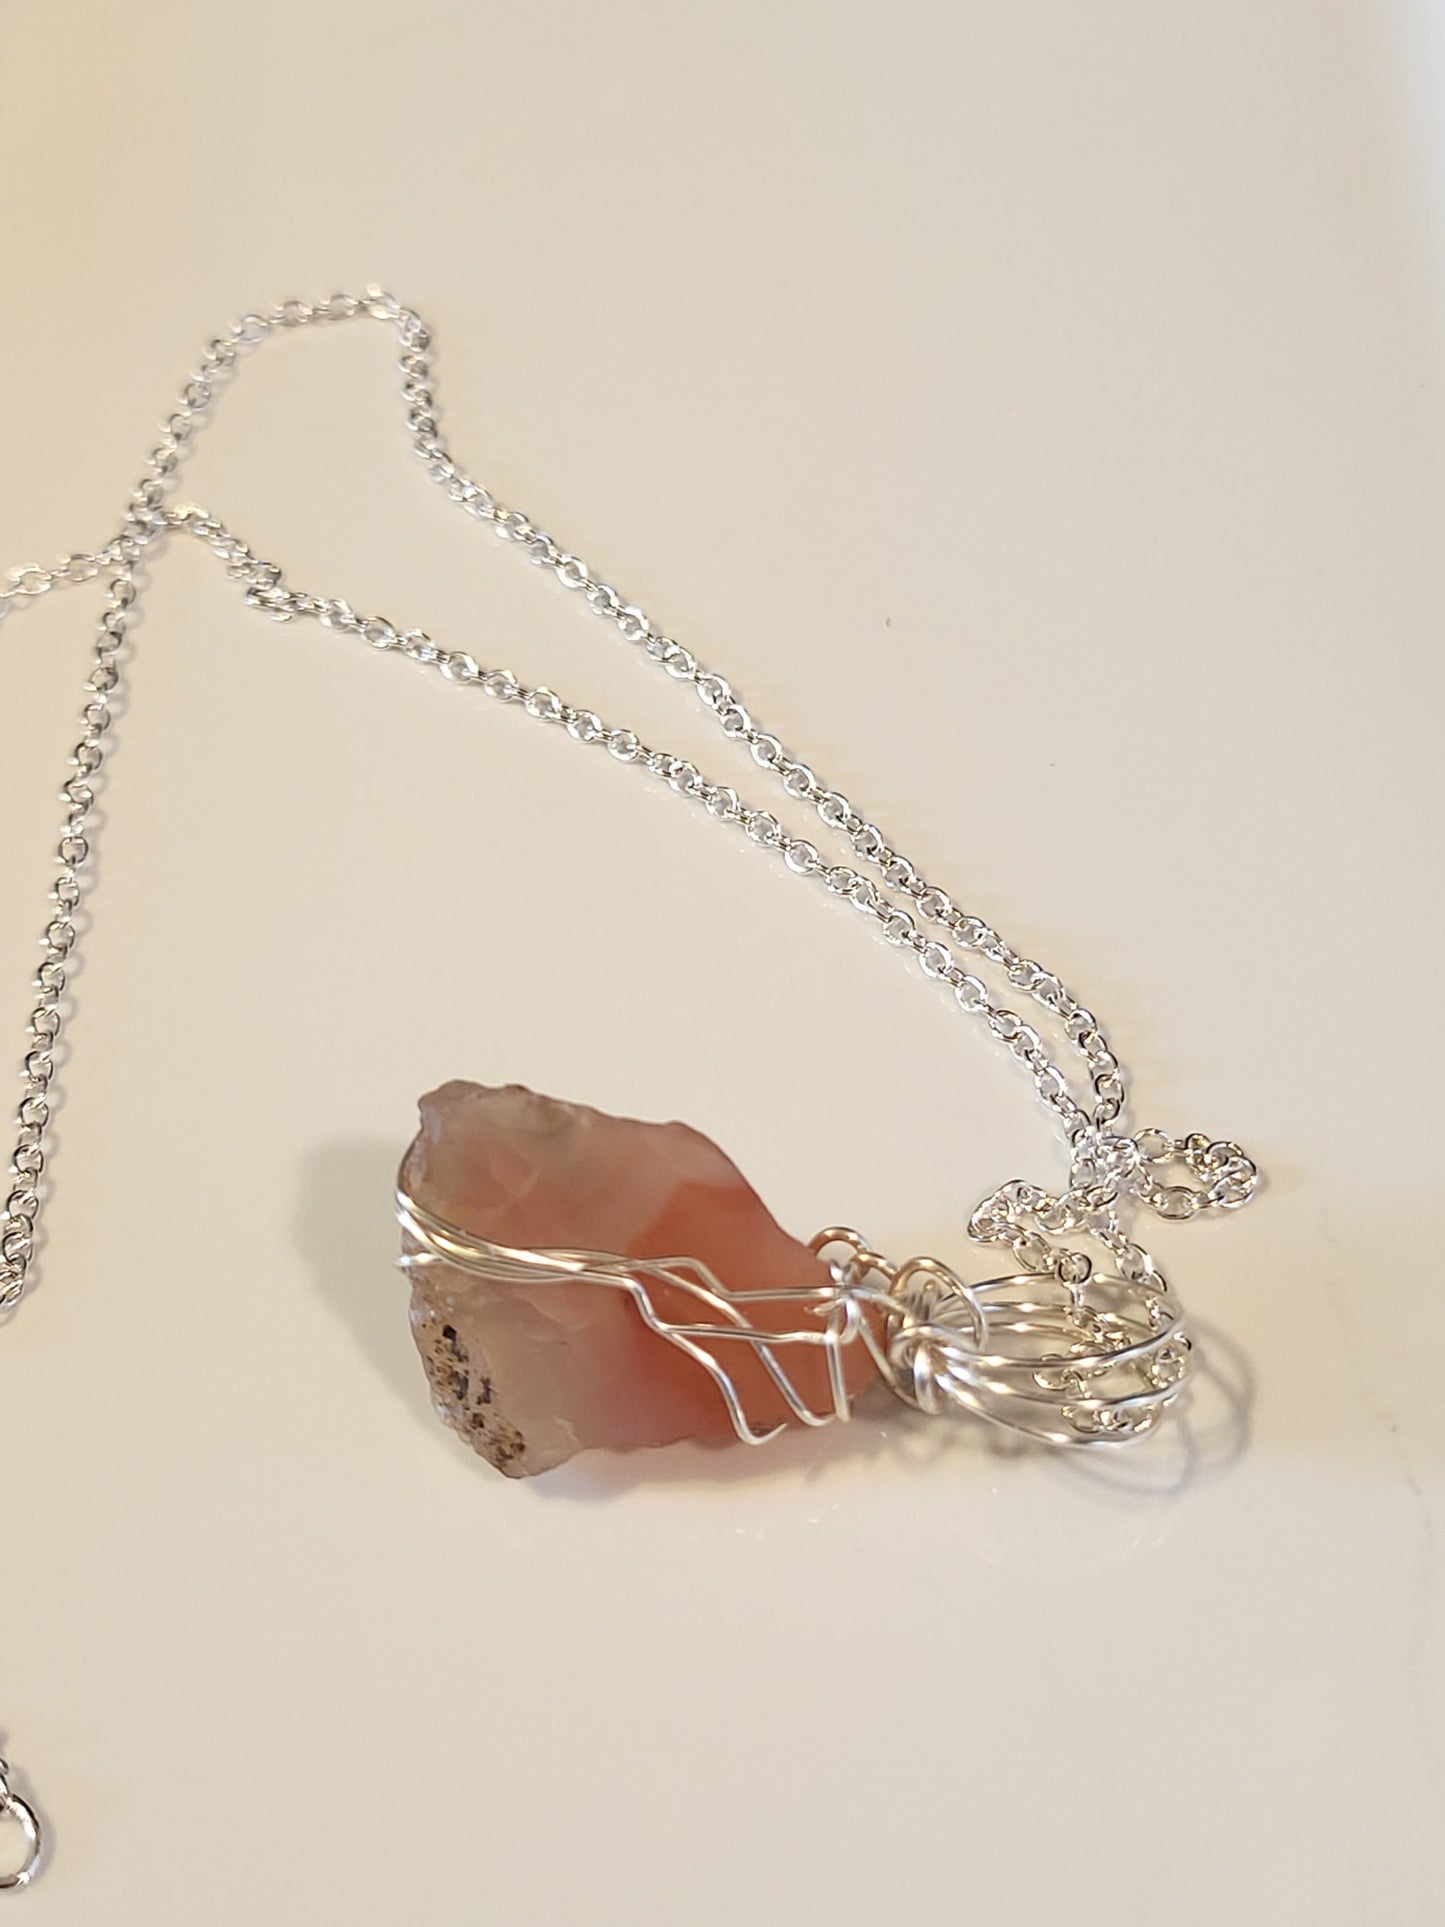 Carneilian Wire Wrapped Stone Necklace